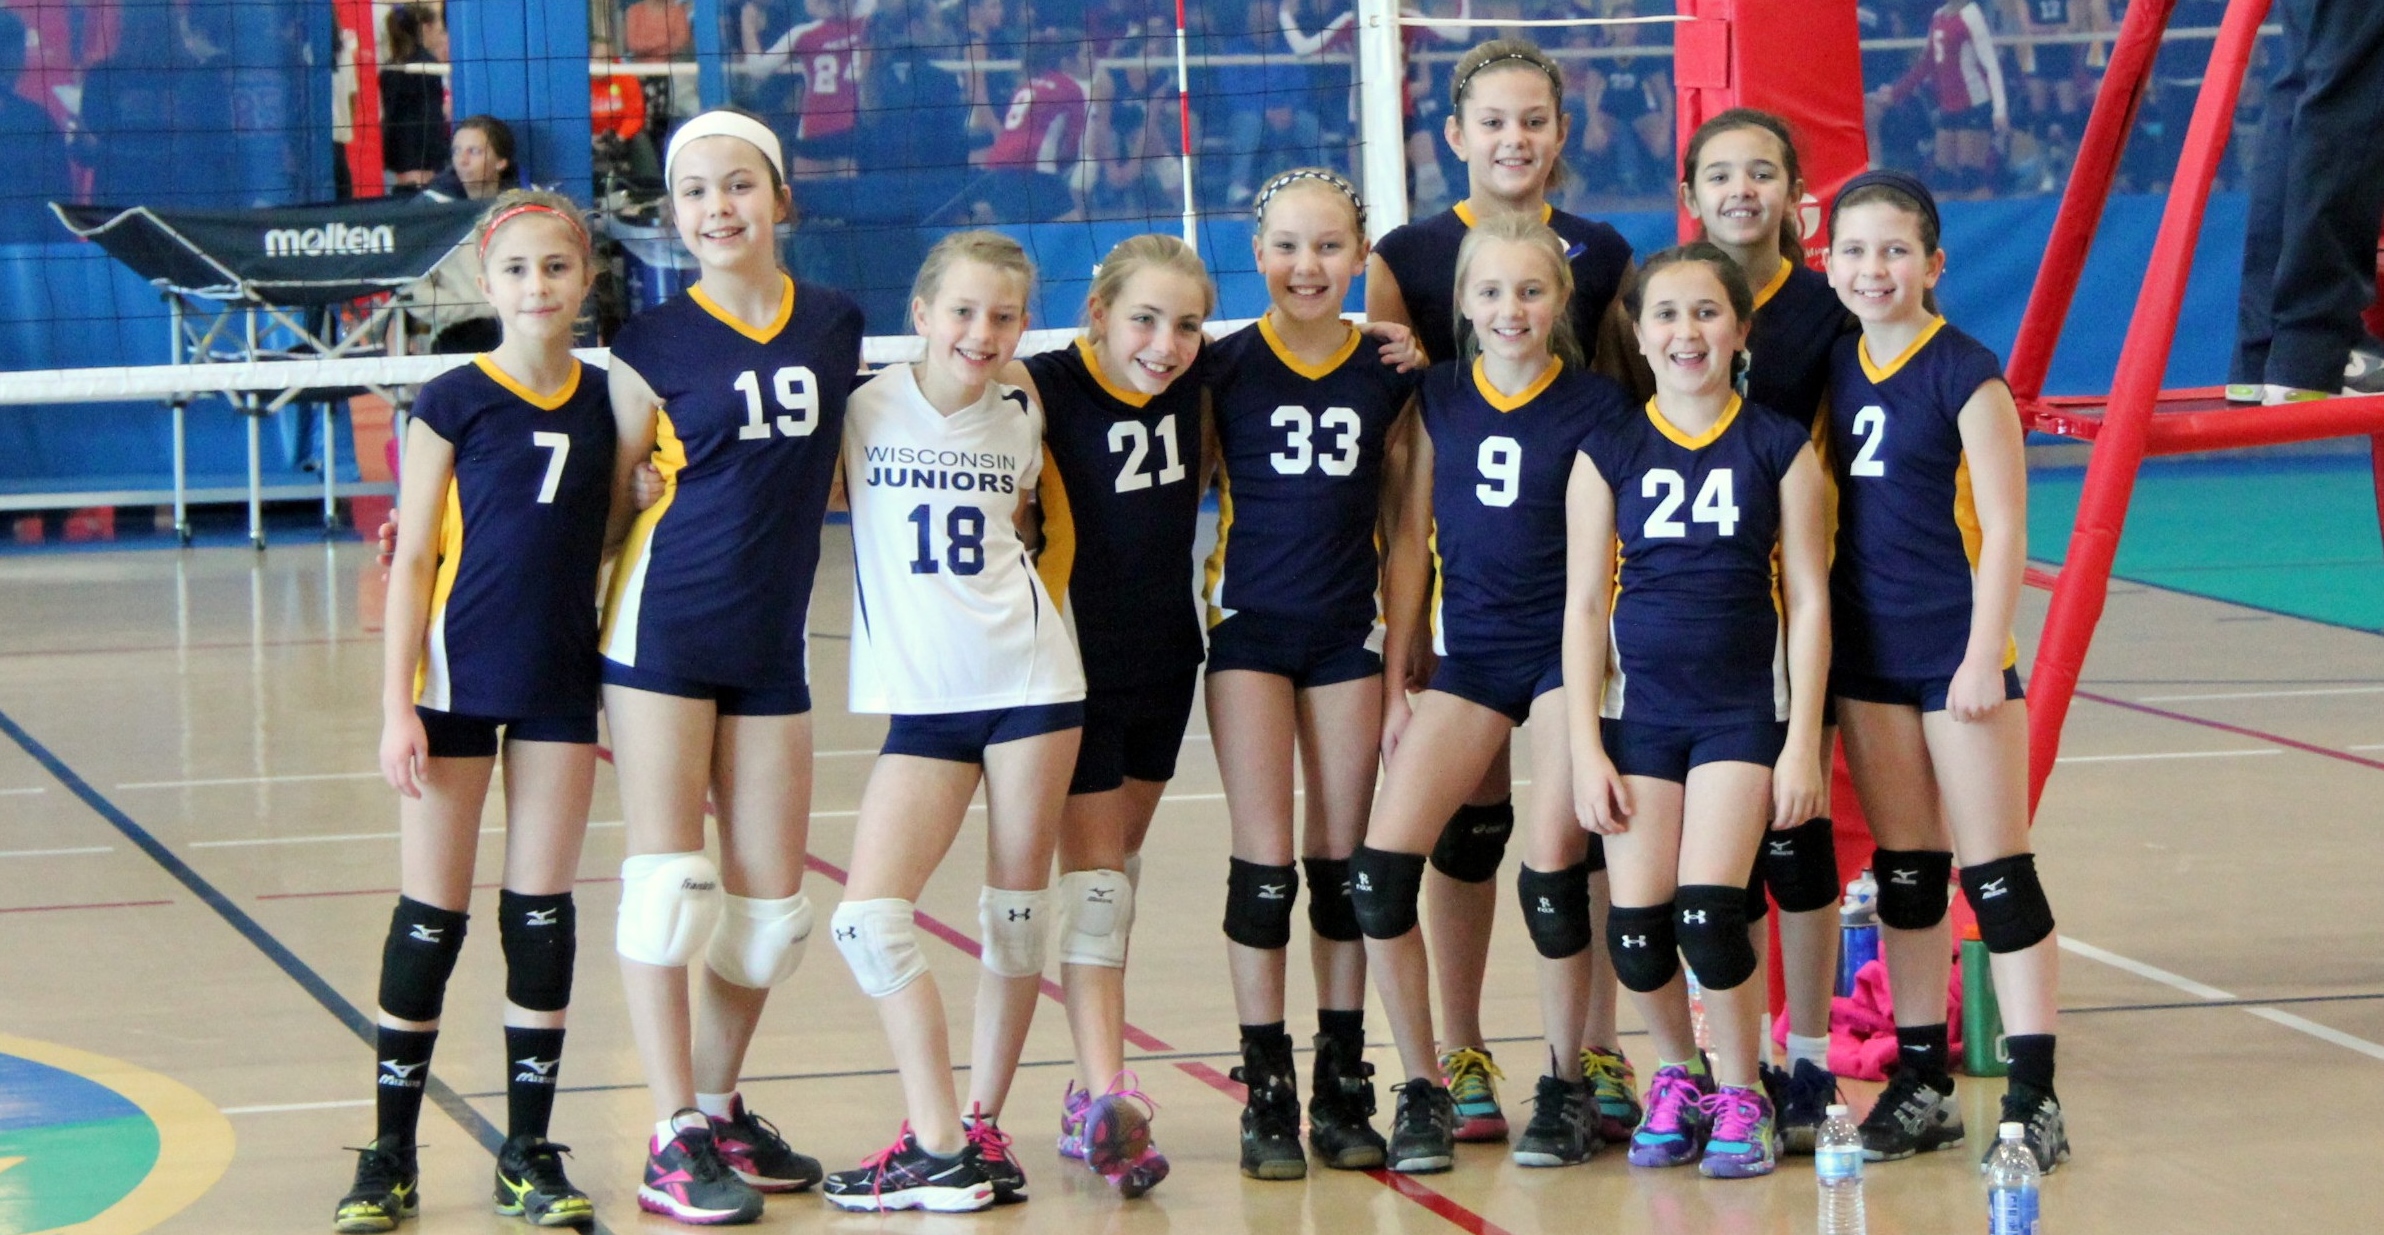 What is Club Volleyball - Wisconsin Juniors